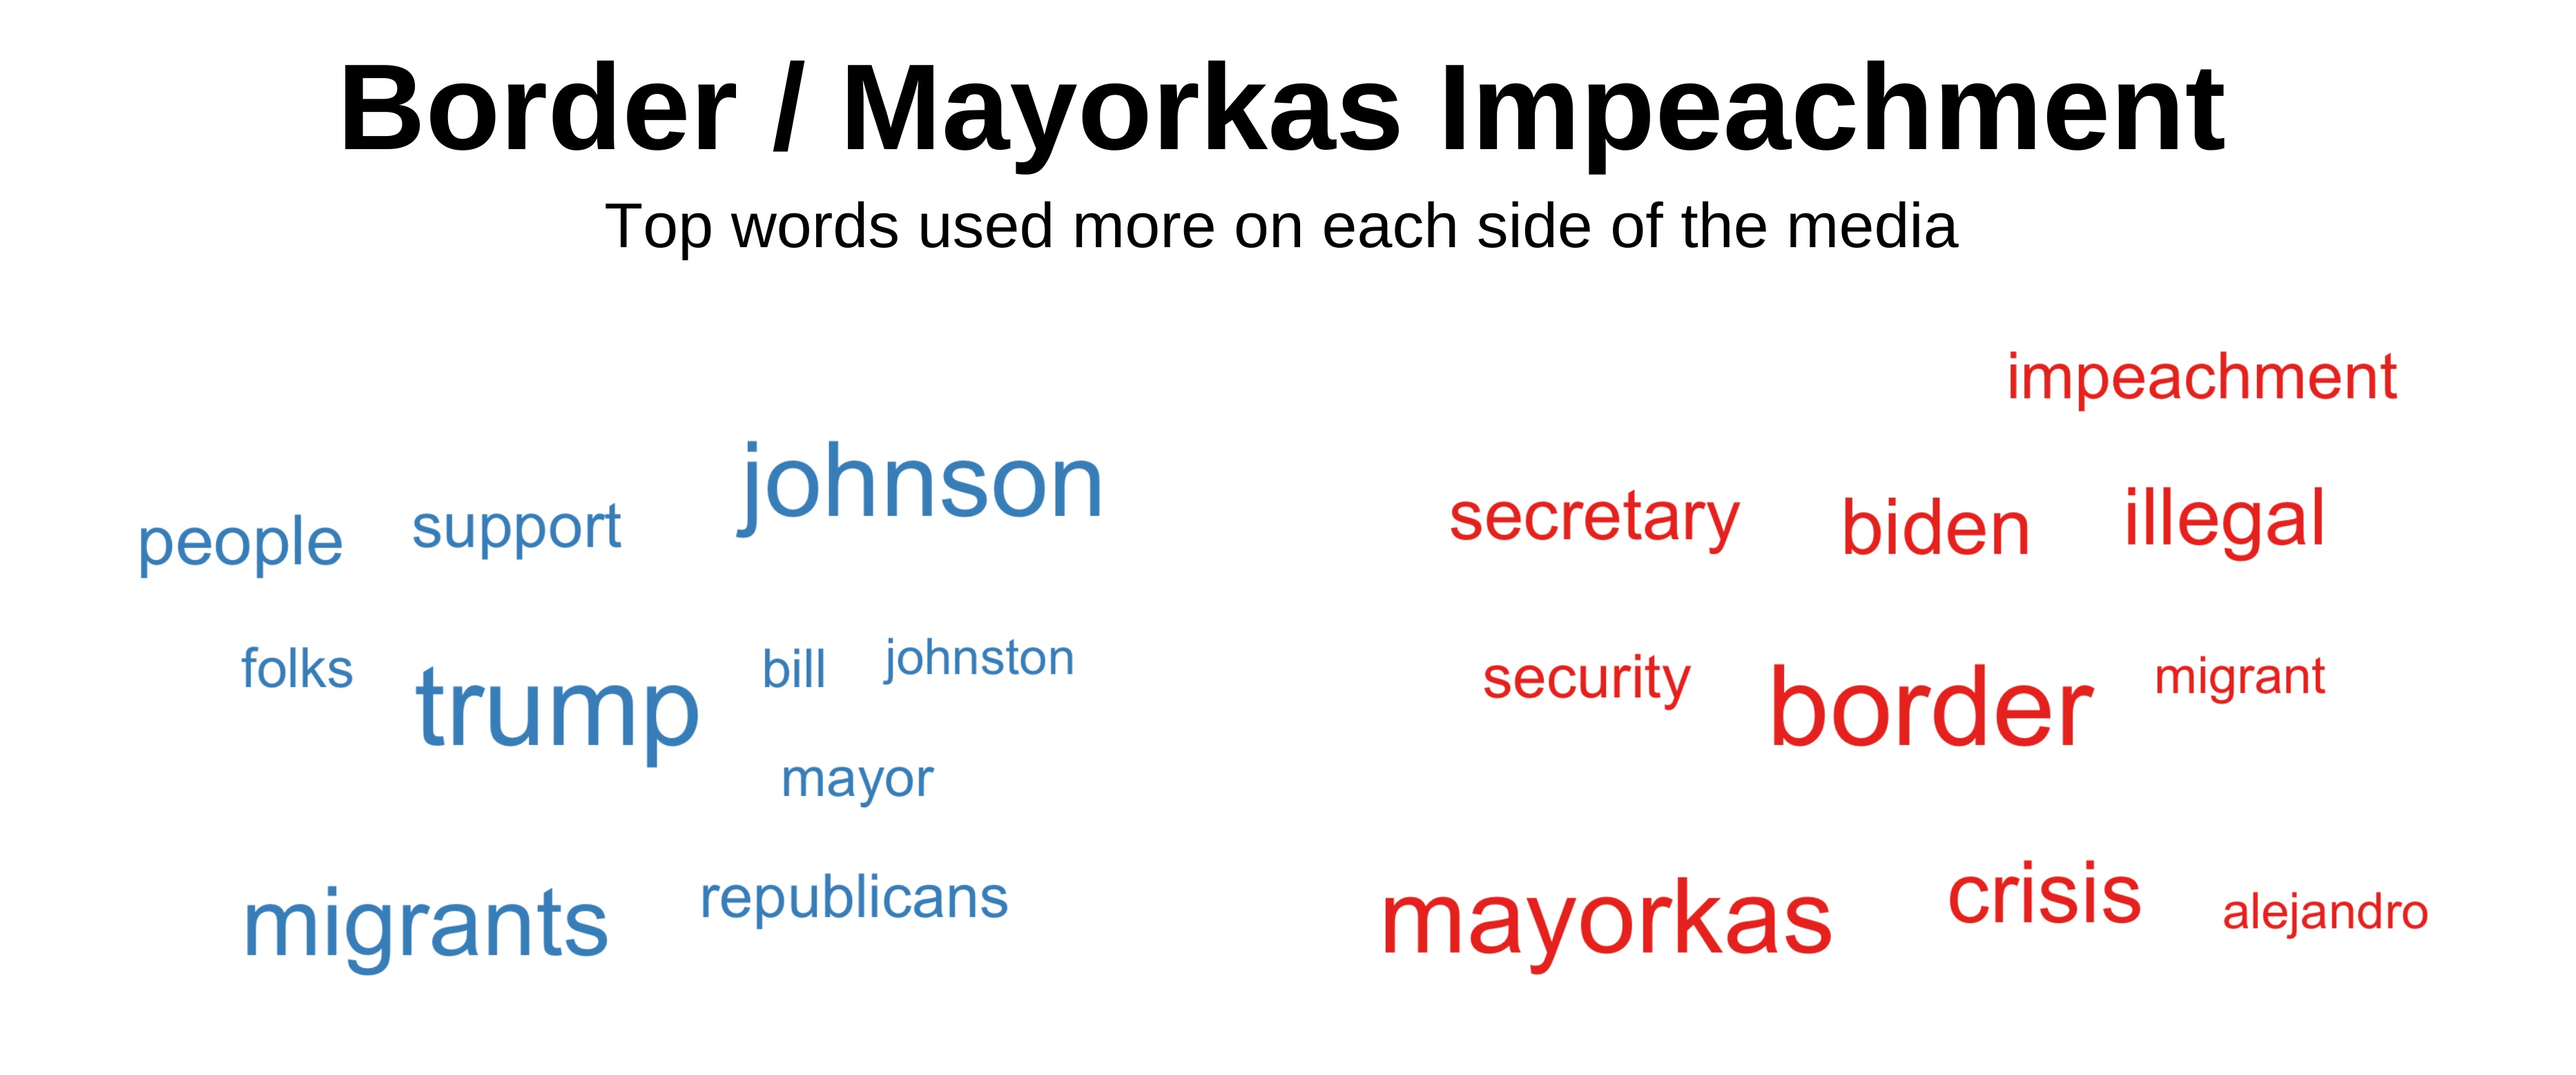 Top words about the Alejandro Mayorkas impeachment used more on each side of the media.